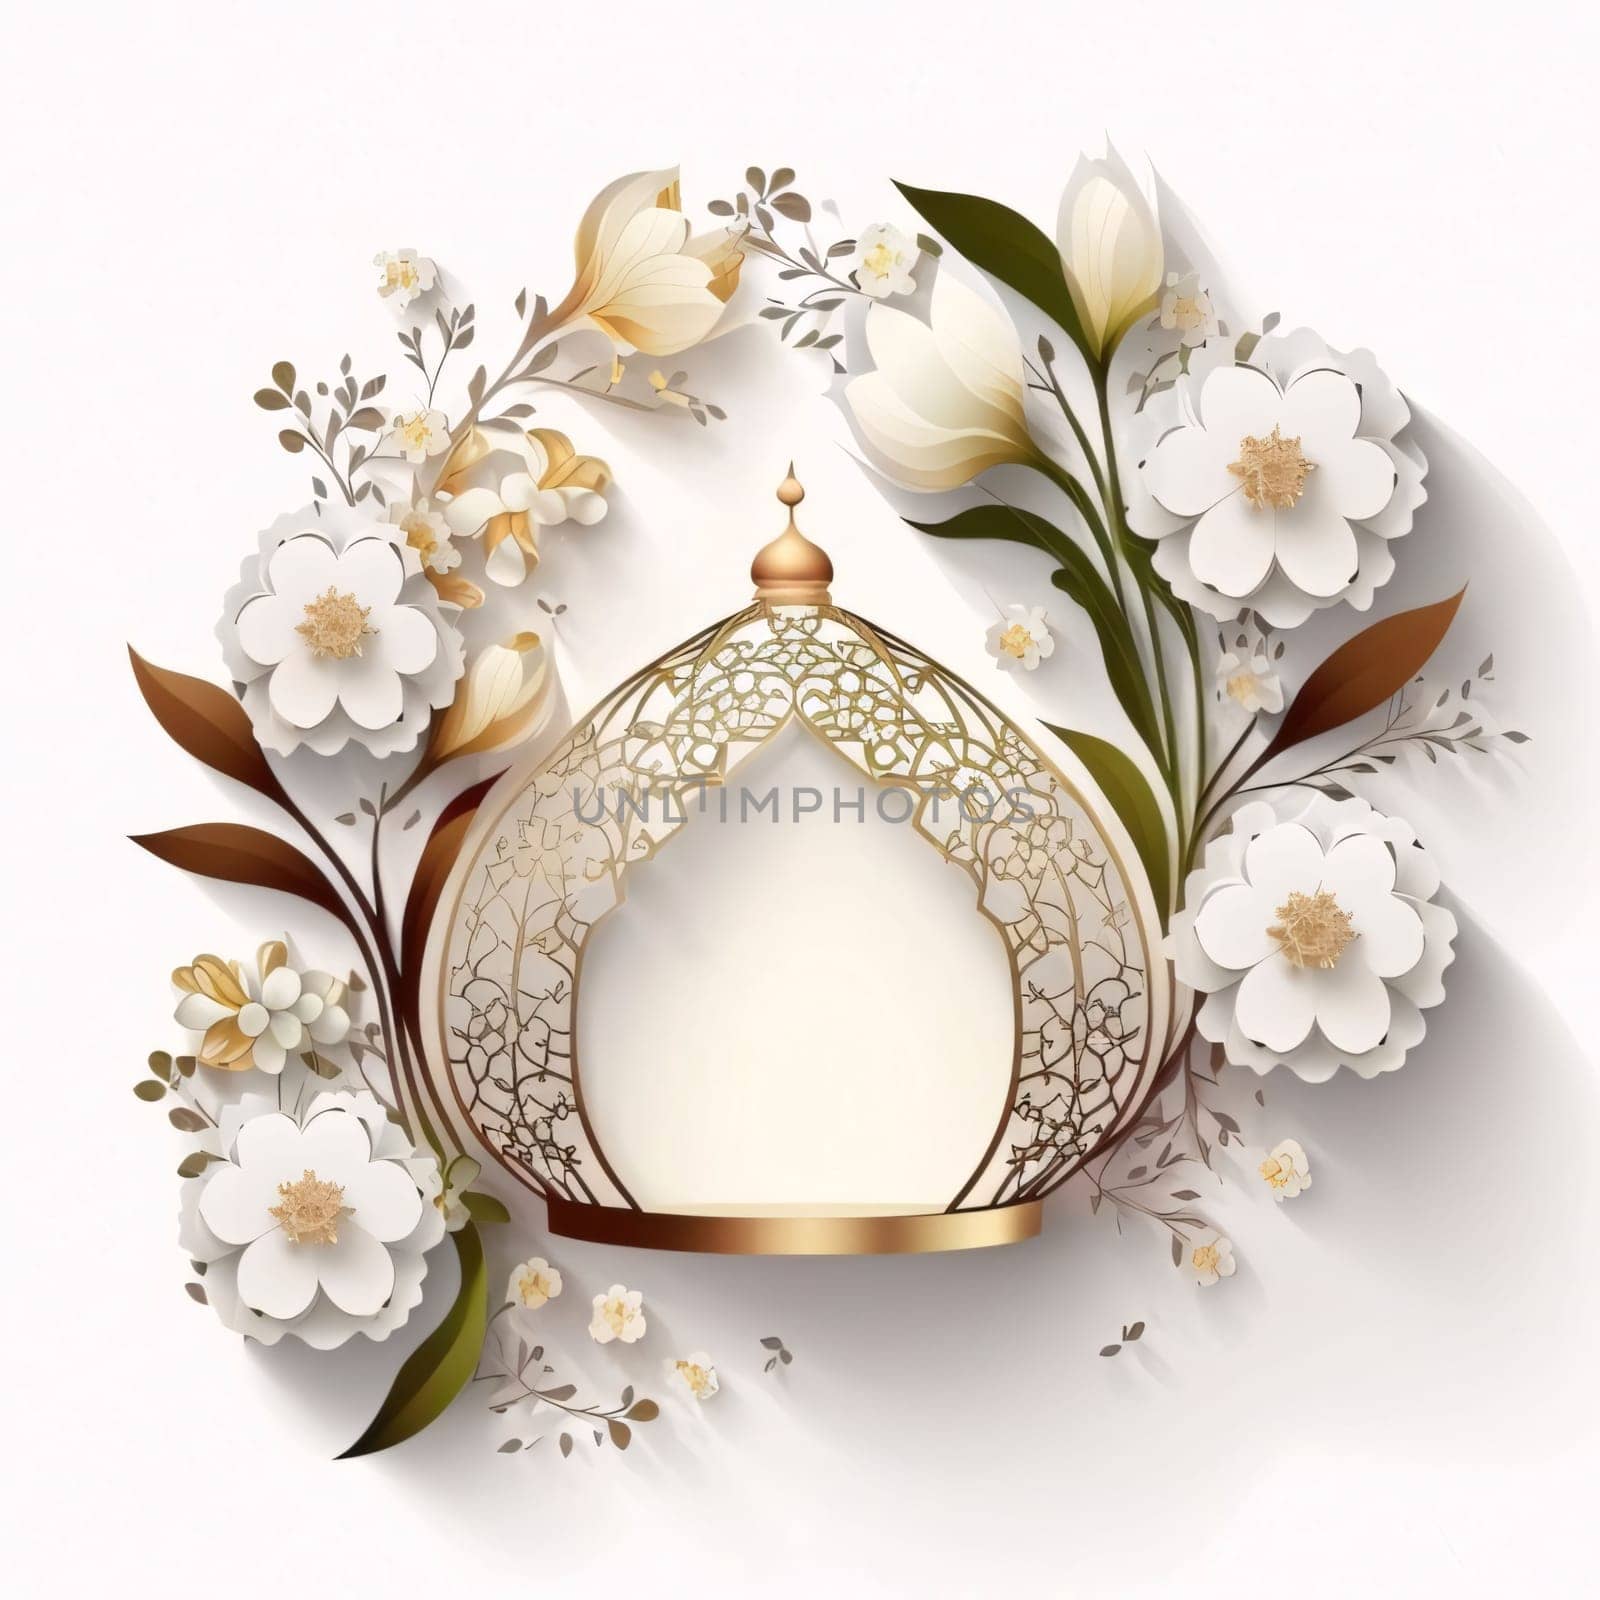 Gold crown decorated with white flowers and leaves white background. Lantern as a symbol of Ramadan for Muslims. A time to meet with God.